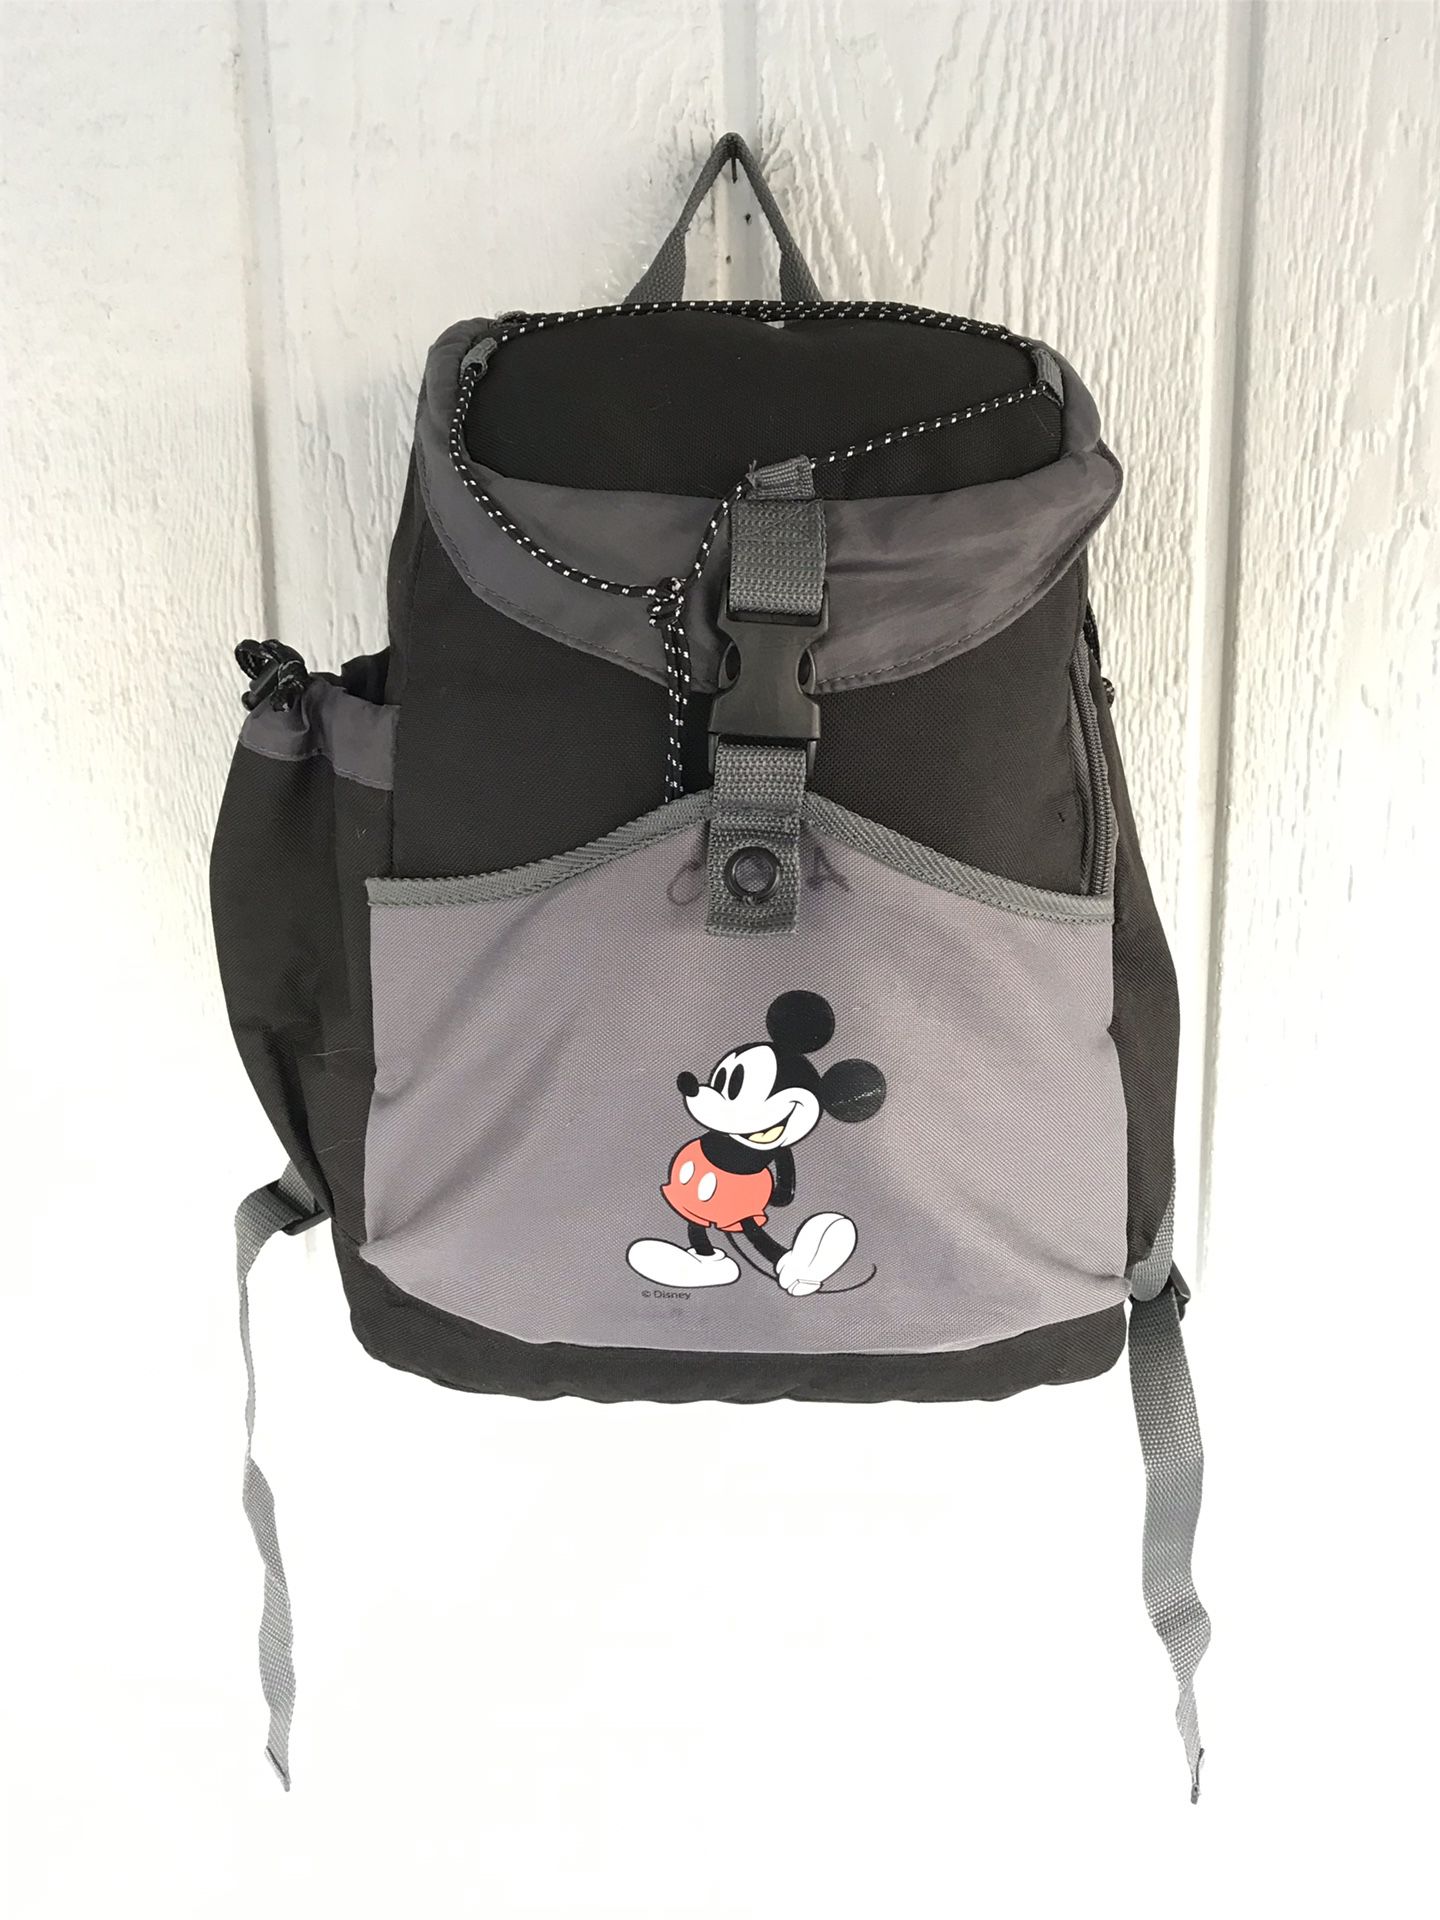 Disney Mickey Mouse Insulated Backpack Cooler Adult Size Black Gray Zip Snap